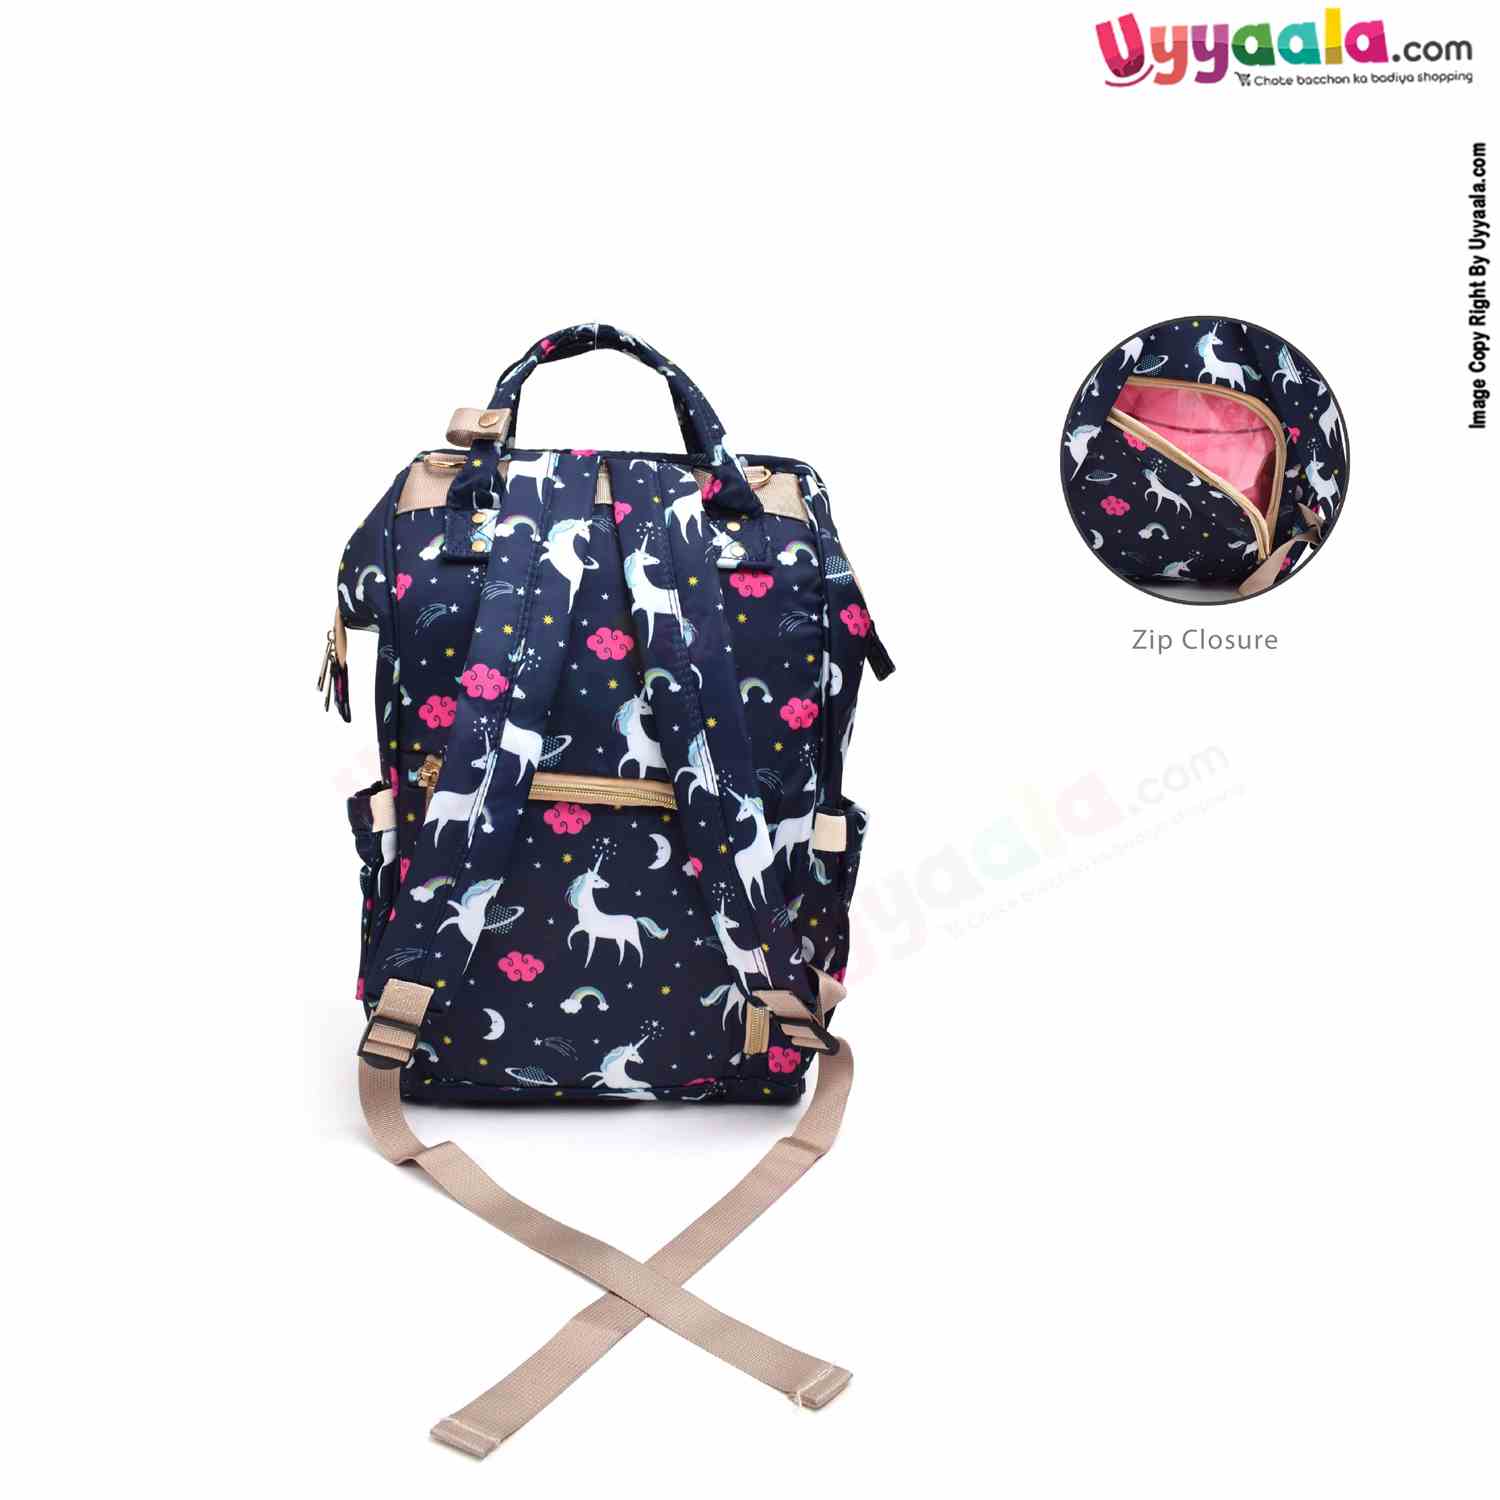 Mother's back pack (diaper bag) comfortable for travelling mothers, premium quality - size(46*31cm) - navy blue